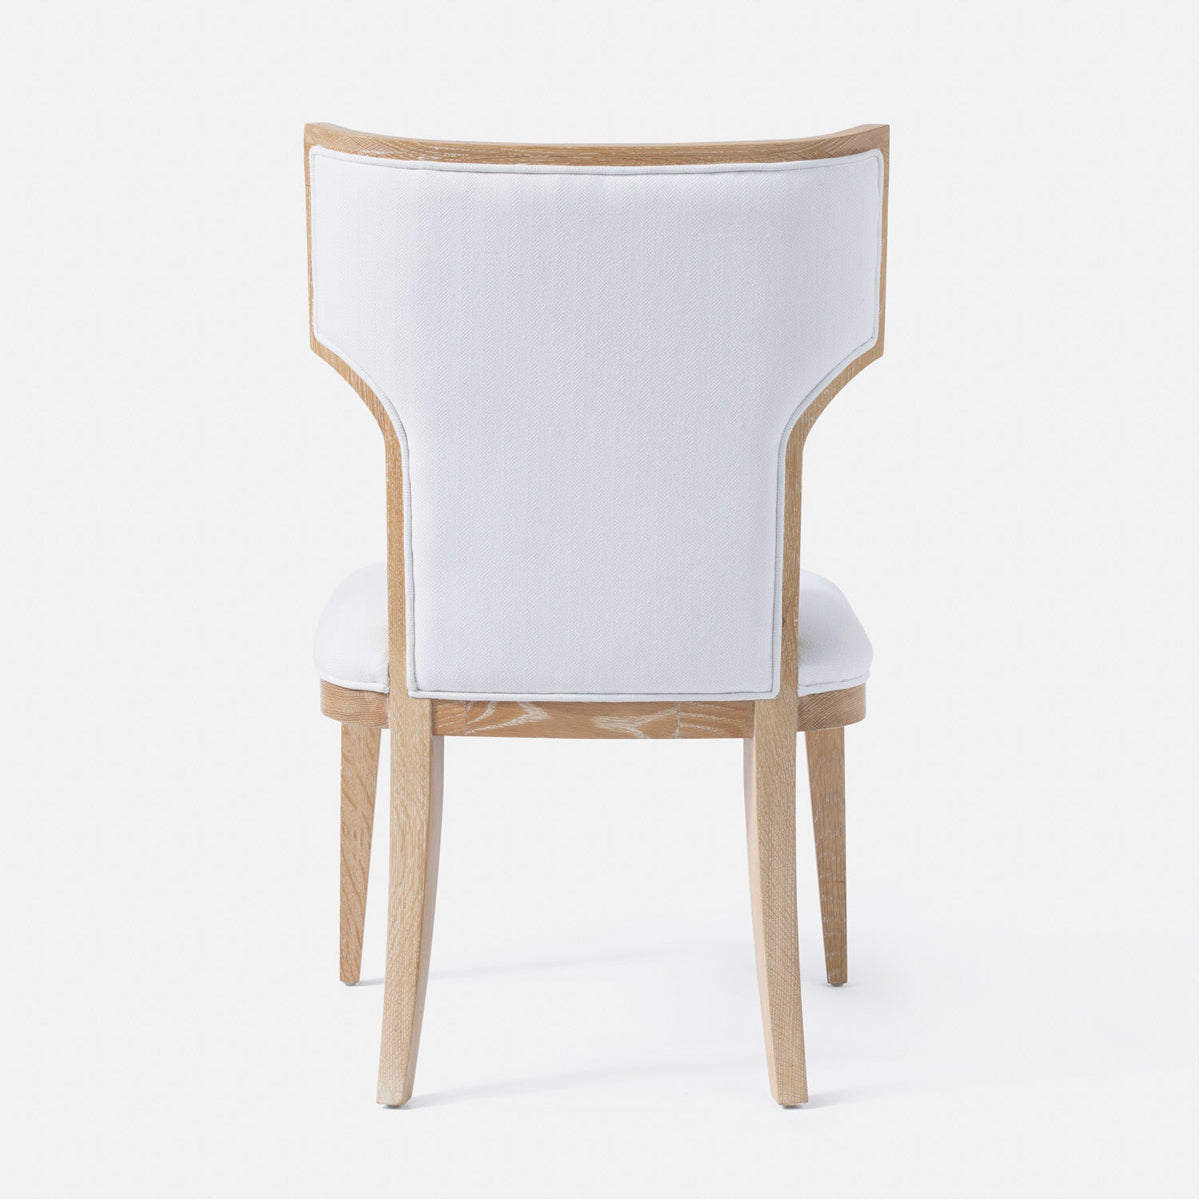 Made Goods Carleen Wingback Dining Chair in Danube Fabric